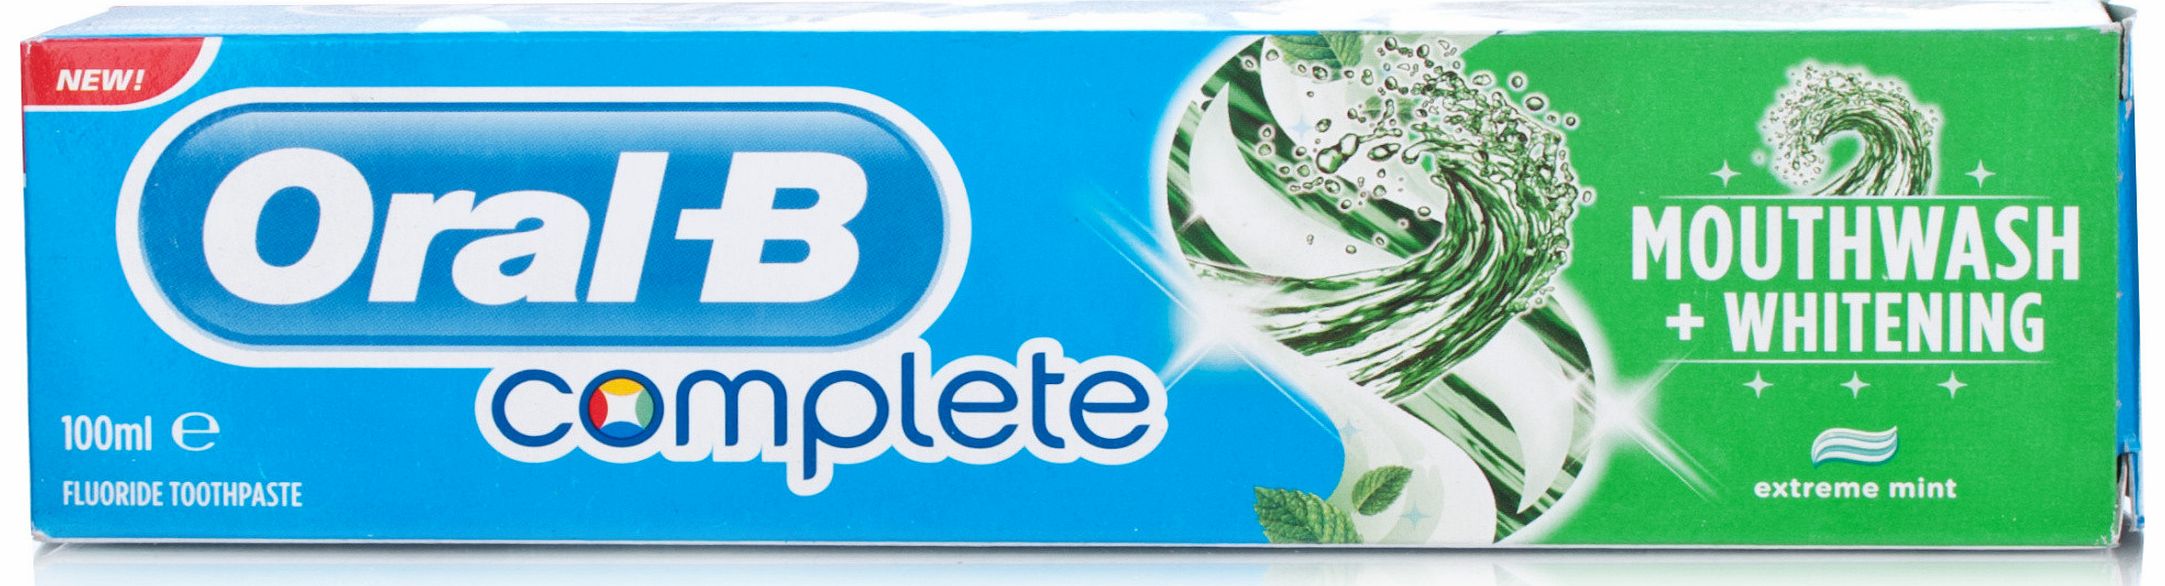 Oral B Oral-B Complete Mouthwash   Whitening Toothpaste